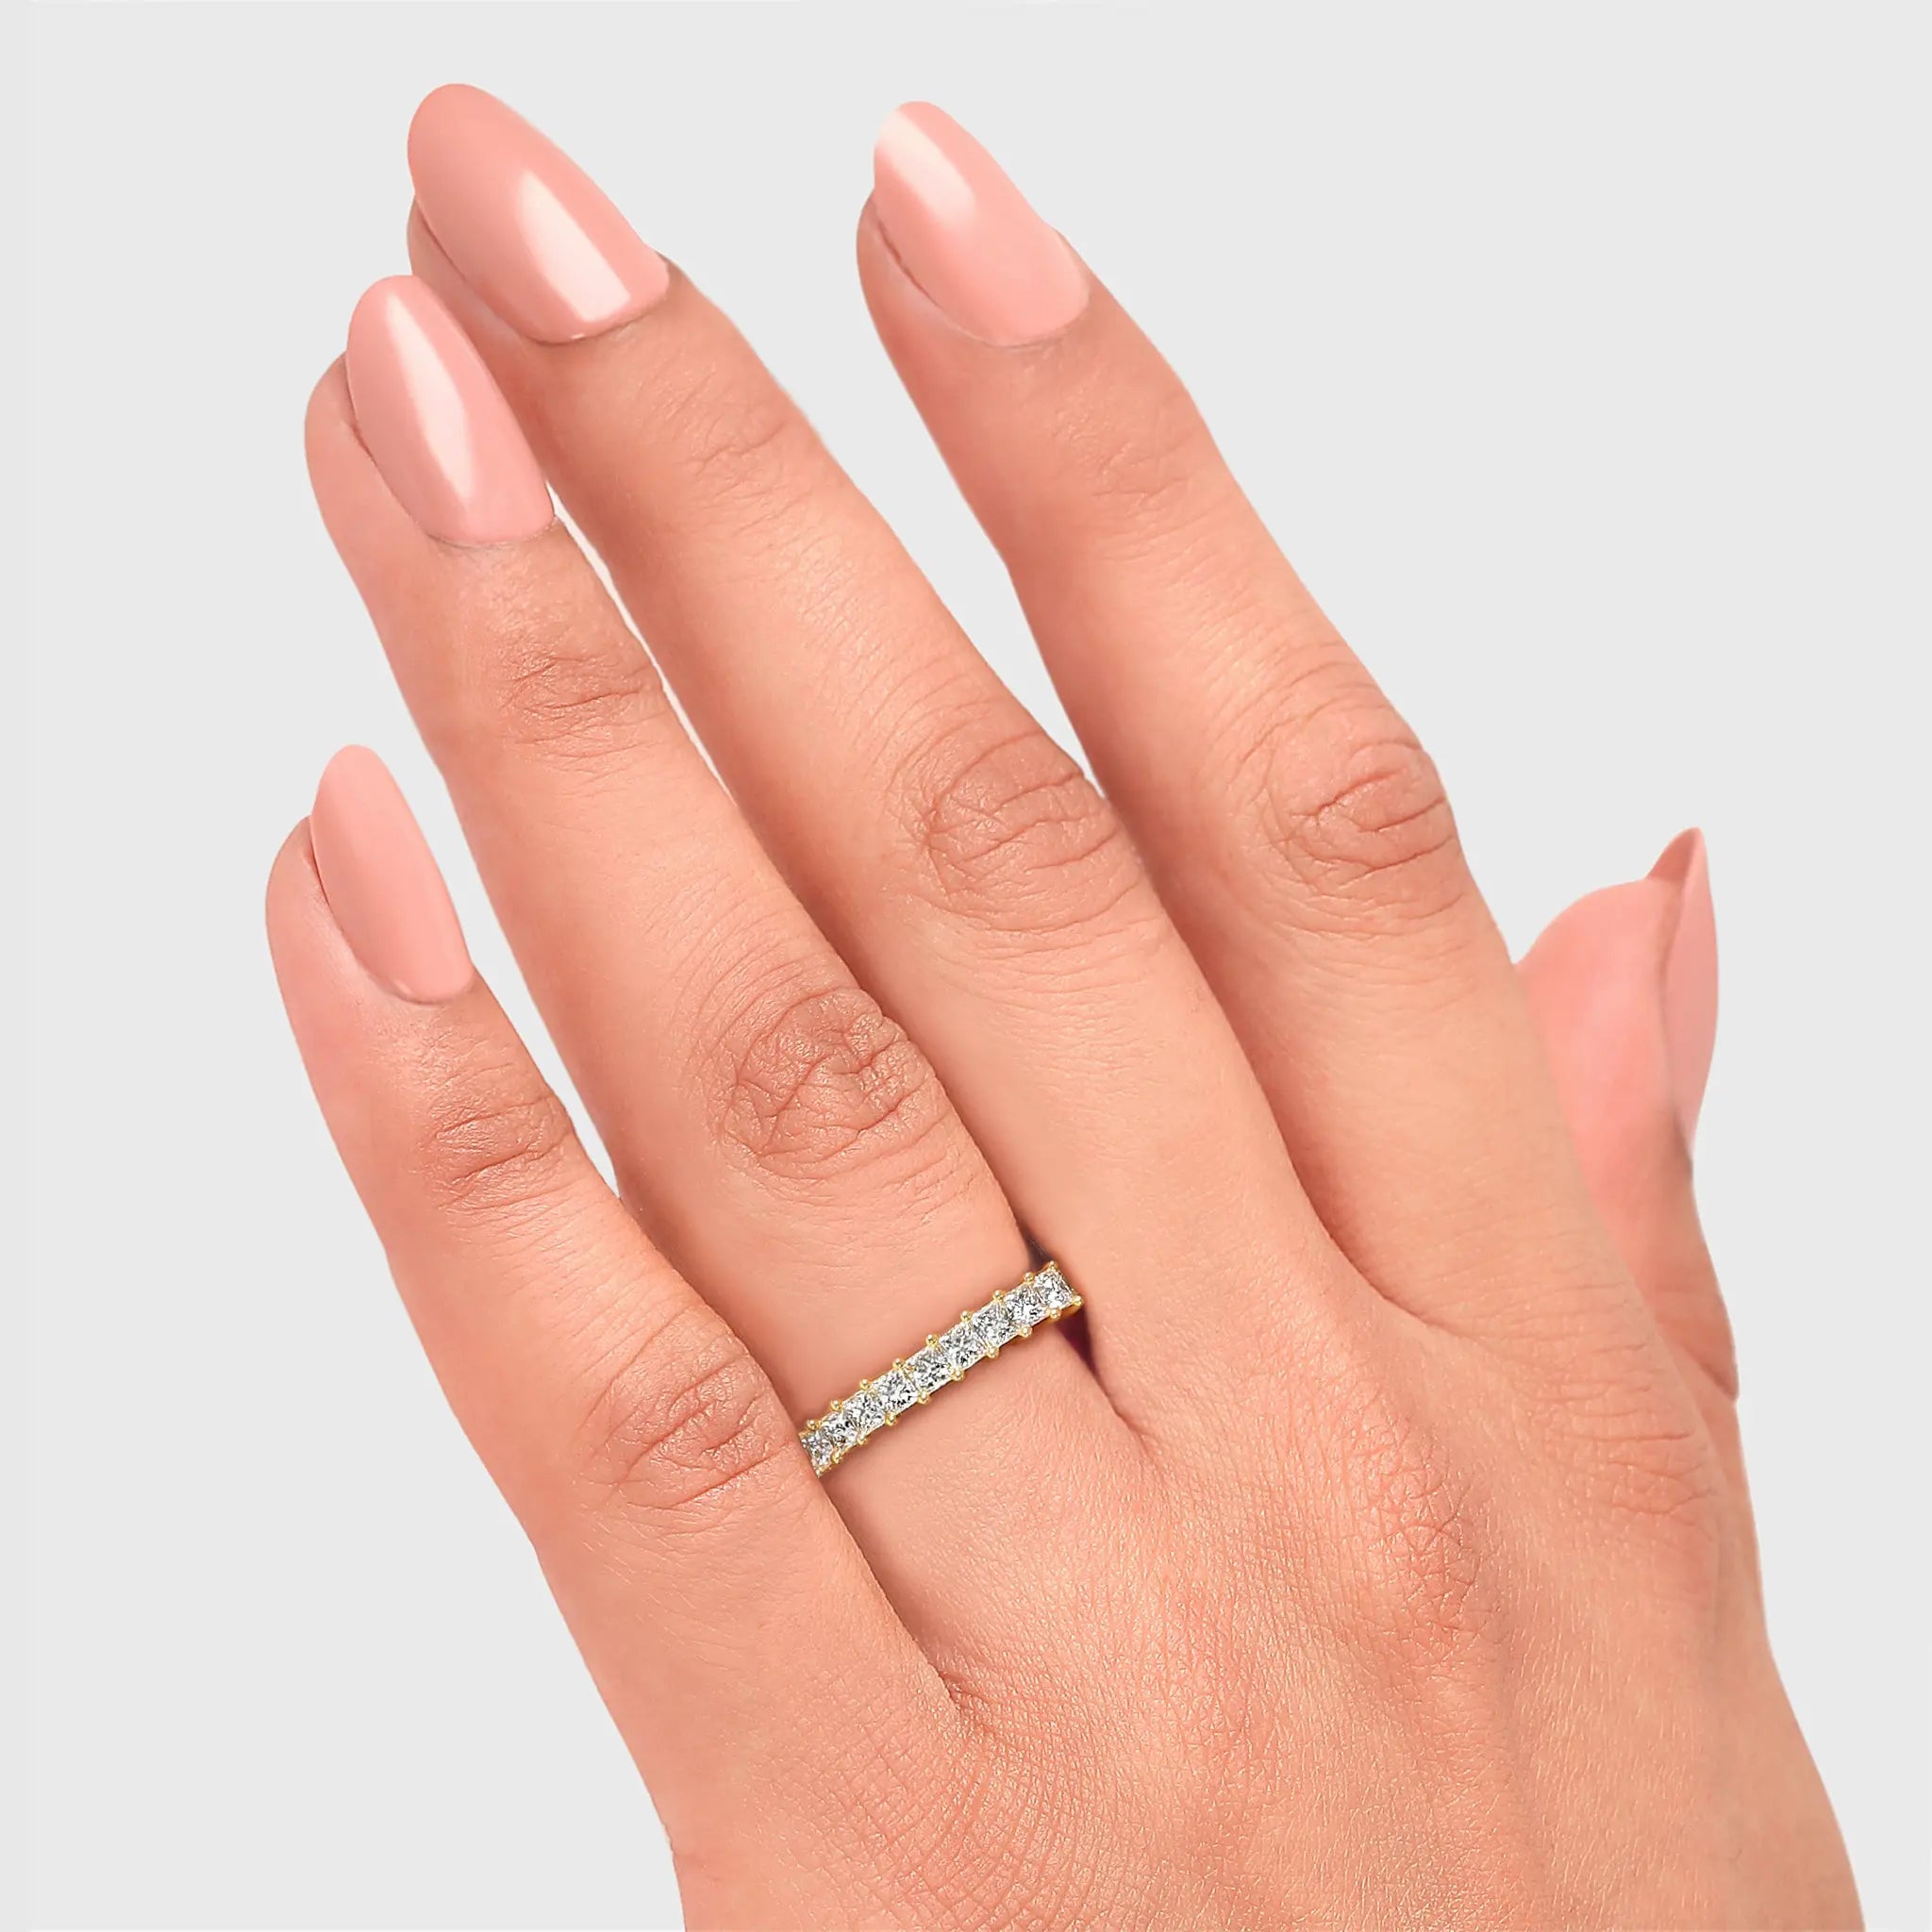 Shimansky - Women Wearing the My Girl Claw set Full Eternity Diamond Ring 2.00ct Crafted in 18K Yellow Gold